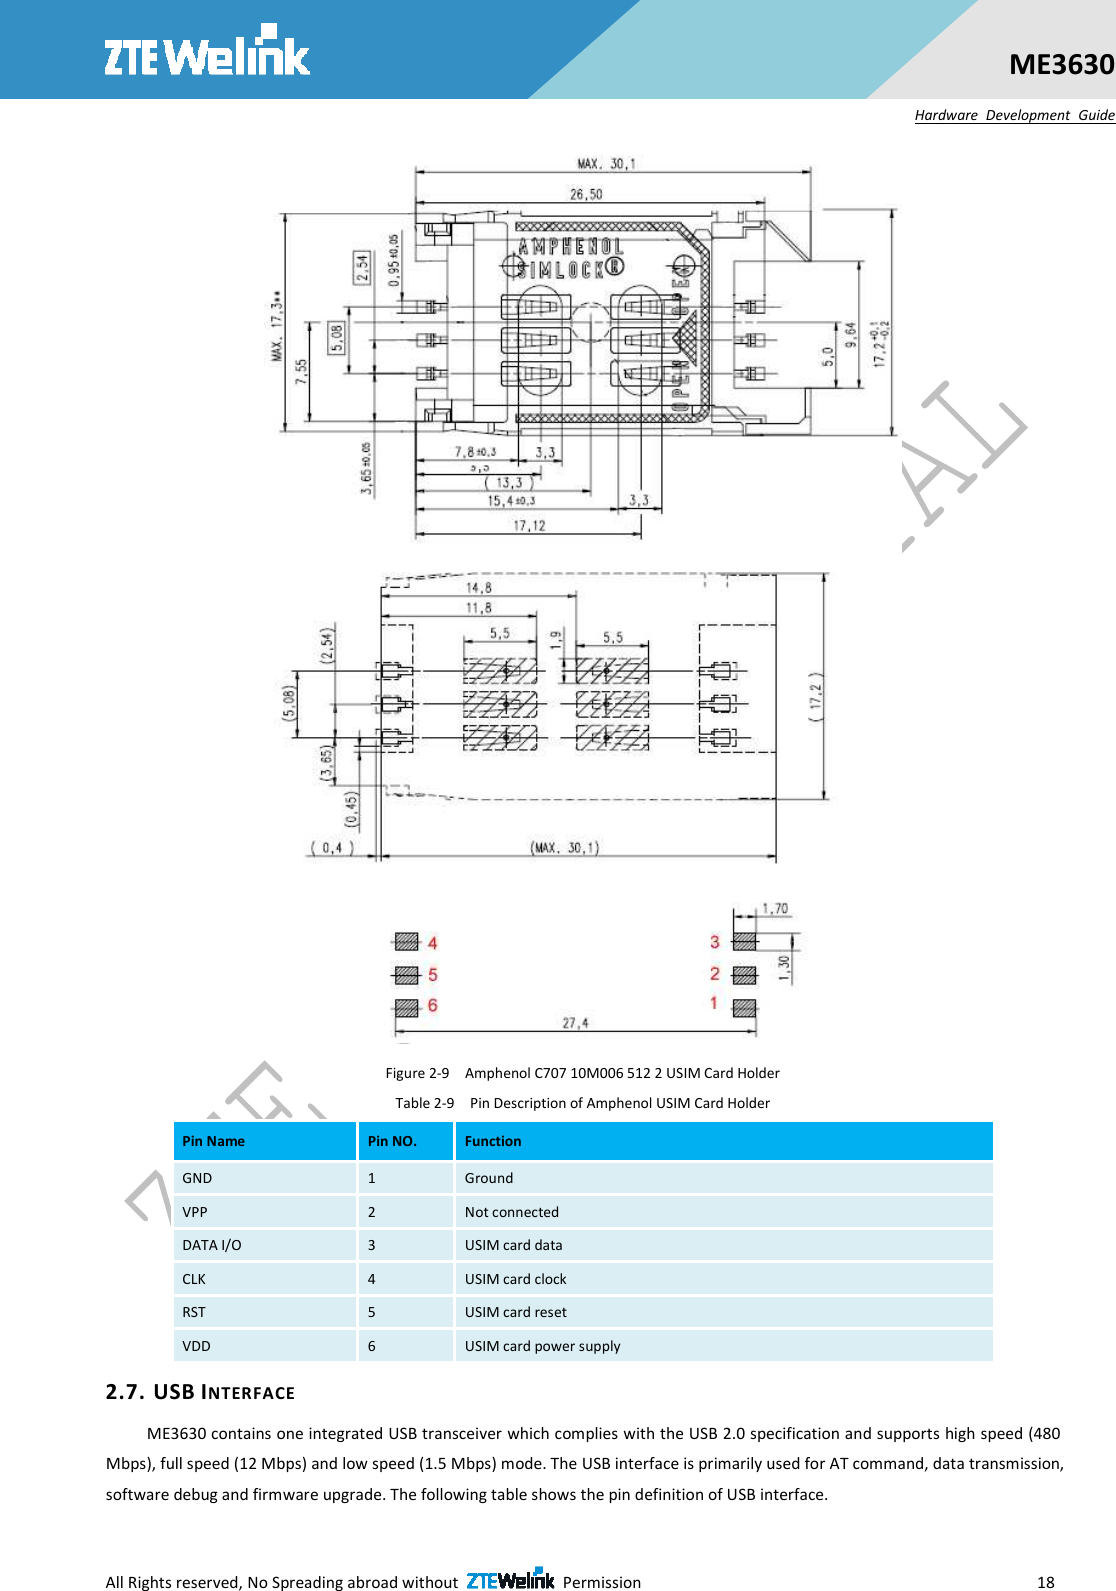  All Rights reserved, No Spreading abroad without    Permission                        18 ME3630 Hardware  Development  Guide  Figure 2-9    Amphenol C707 10M006 512 2 USIM Card Holder   Table 2-9    Pin Description of Amphenol USIM Card Holder Pin Name  Pin NO.  Function GND  1  Ground VPP  2  Not connected DATA I/O  3  USIM card data CLK  4  USIM card clock RST  5  USIM card reset VDD  6  USIM card power supply 2.7. USB INTERFACE ME3630 contains one integrated USB transceiver which complies with the USB 2.0 specification and supports high speed (480 Mbps), full speed (12 Mbps) and low speed (1.5 Mbps) mode. The USB interface is primarily used for AT command, data transmission, software debug and firmware upgrade. The following table shows the pin definition of USB interface. 